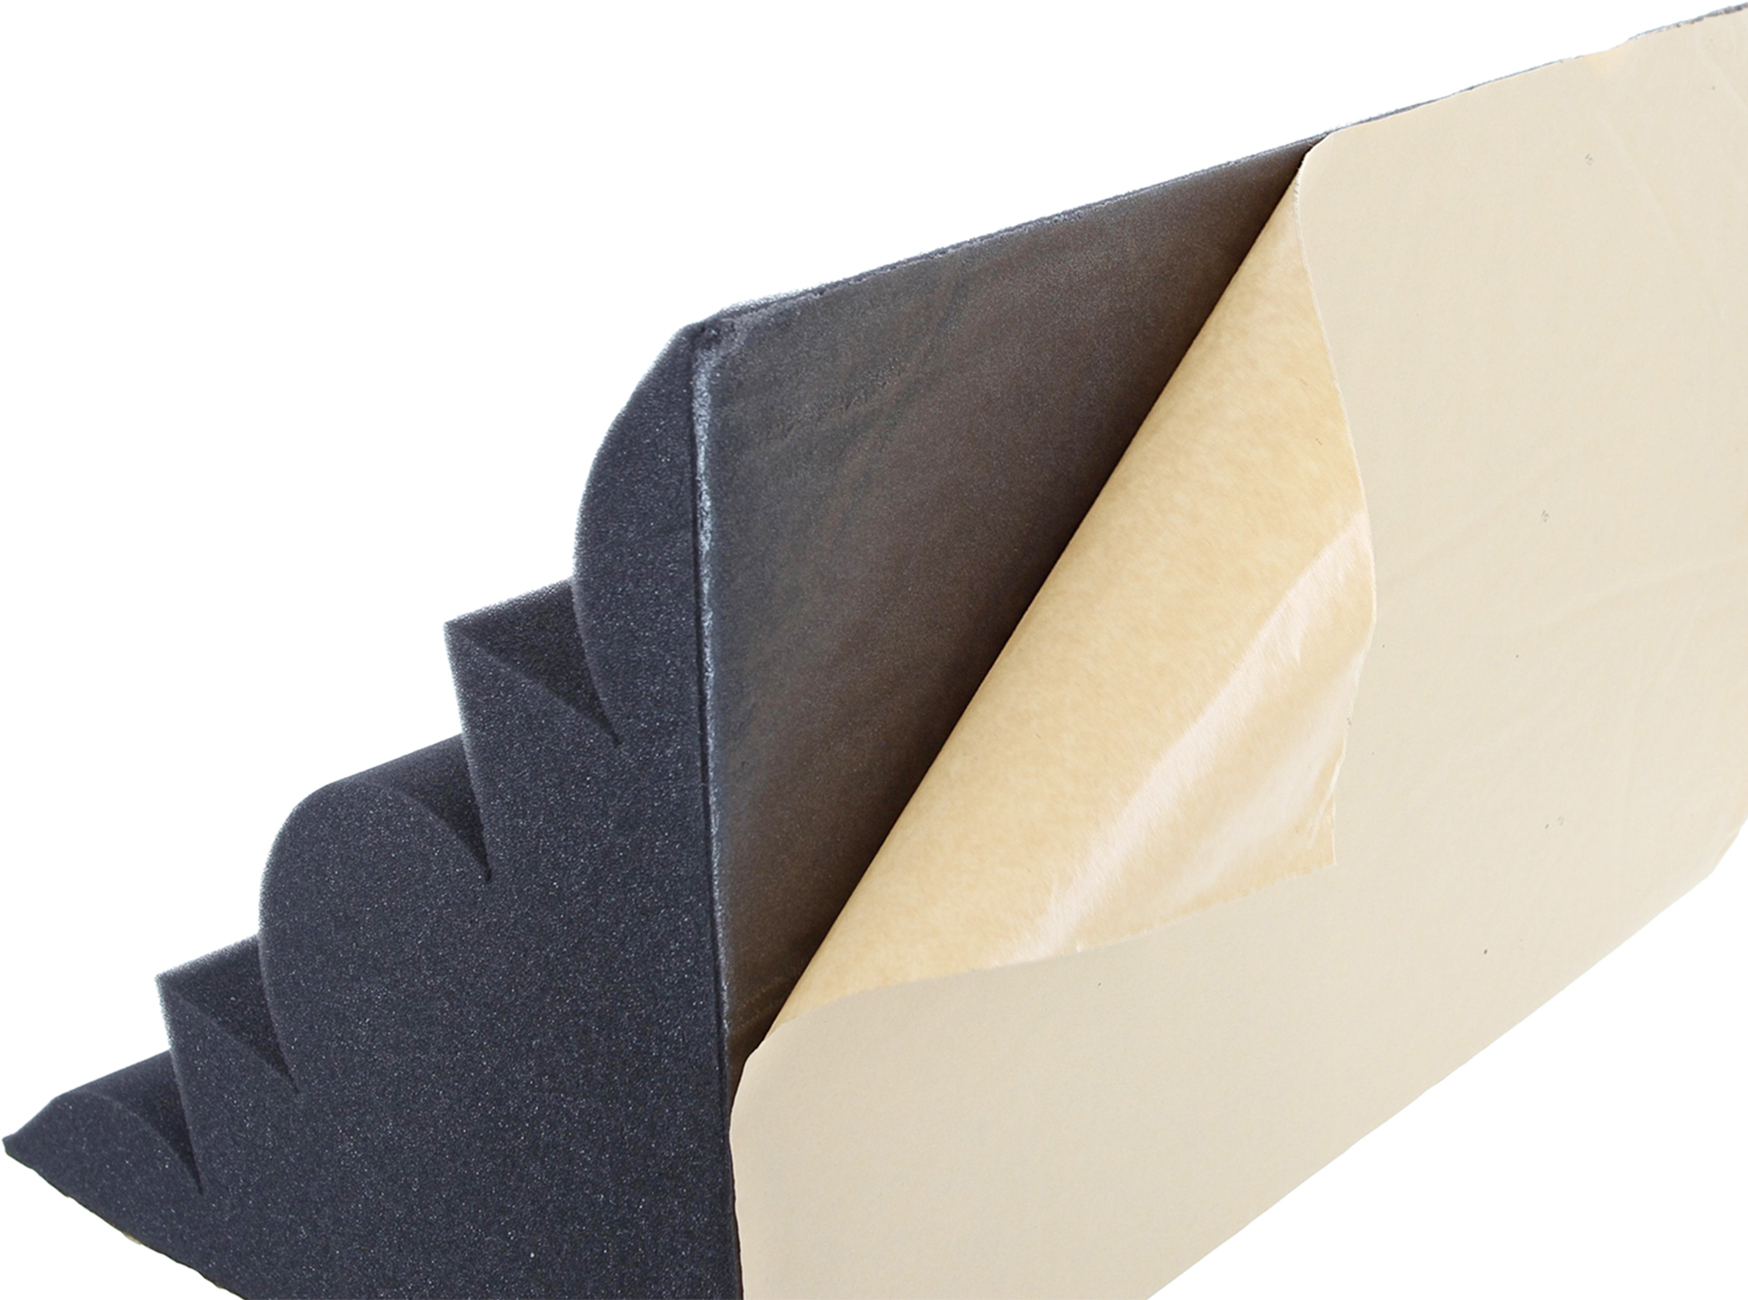 Power Studio Foam Bass 70 Adhesive Pack 2 Pieces - Panel for acoustic treatment - Variation 3